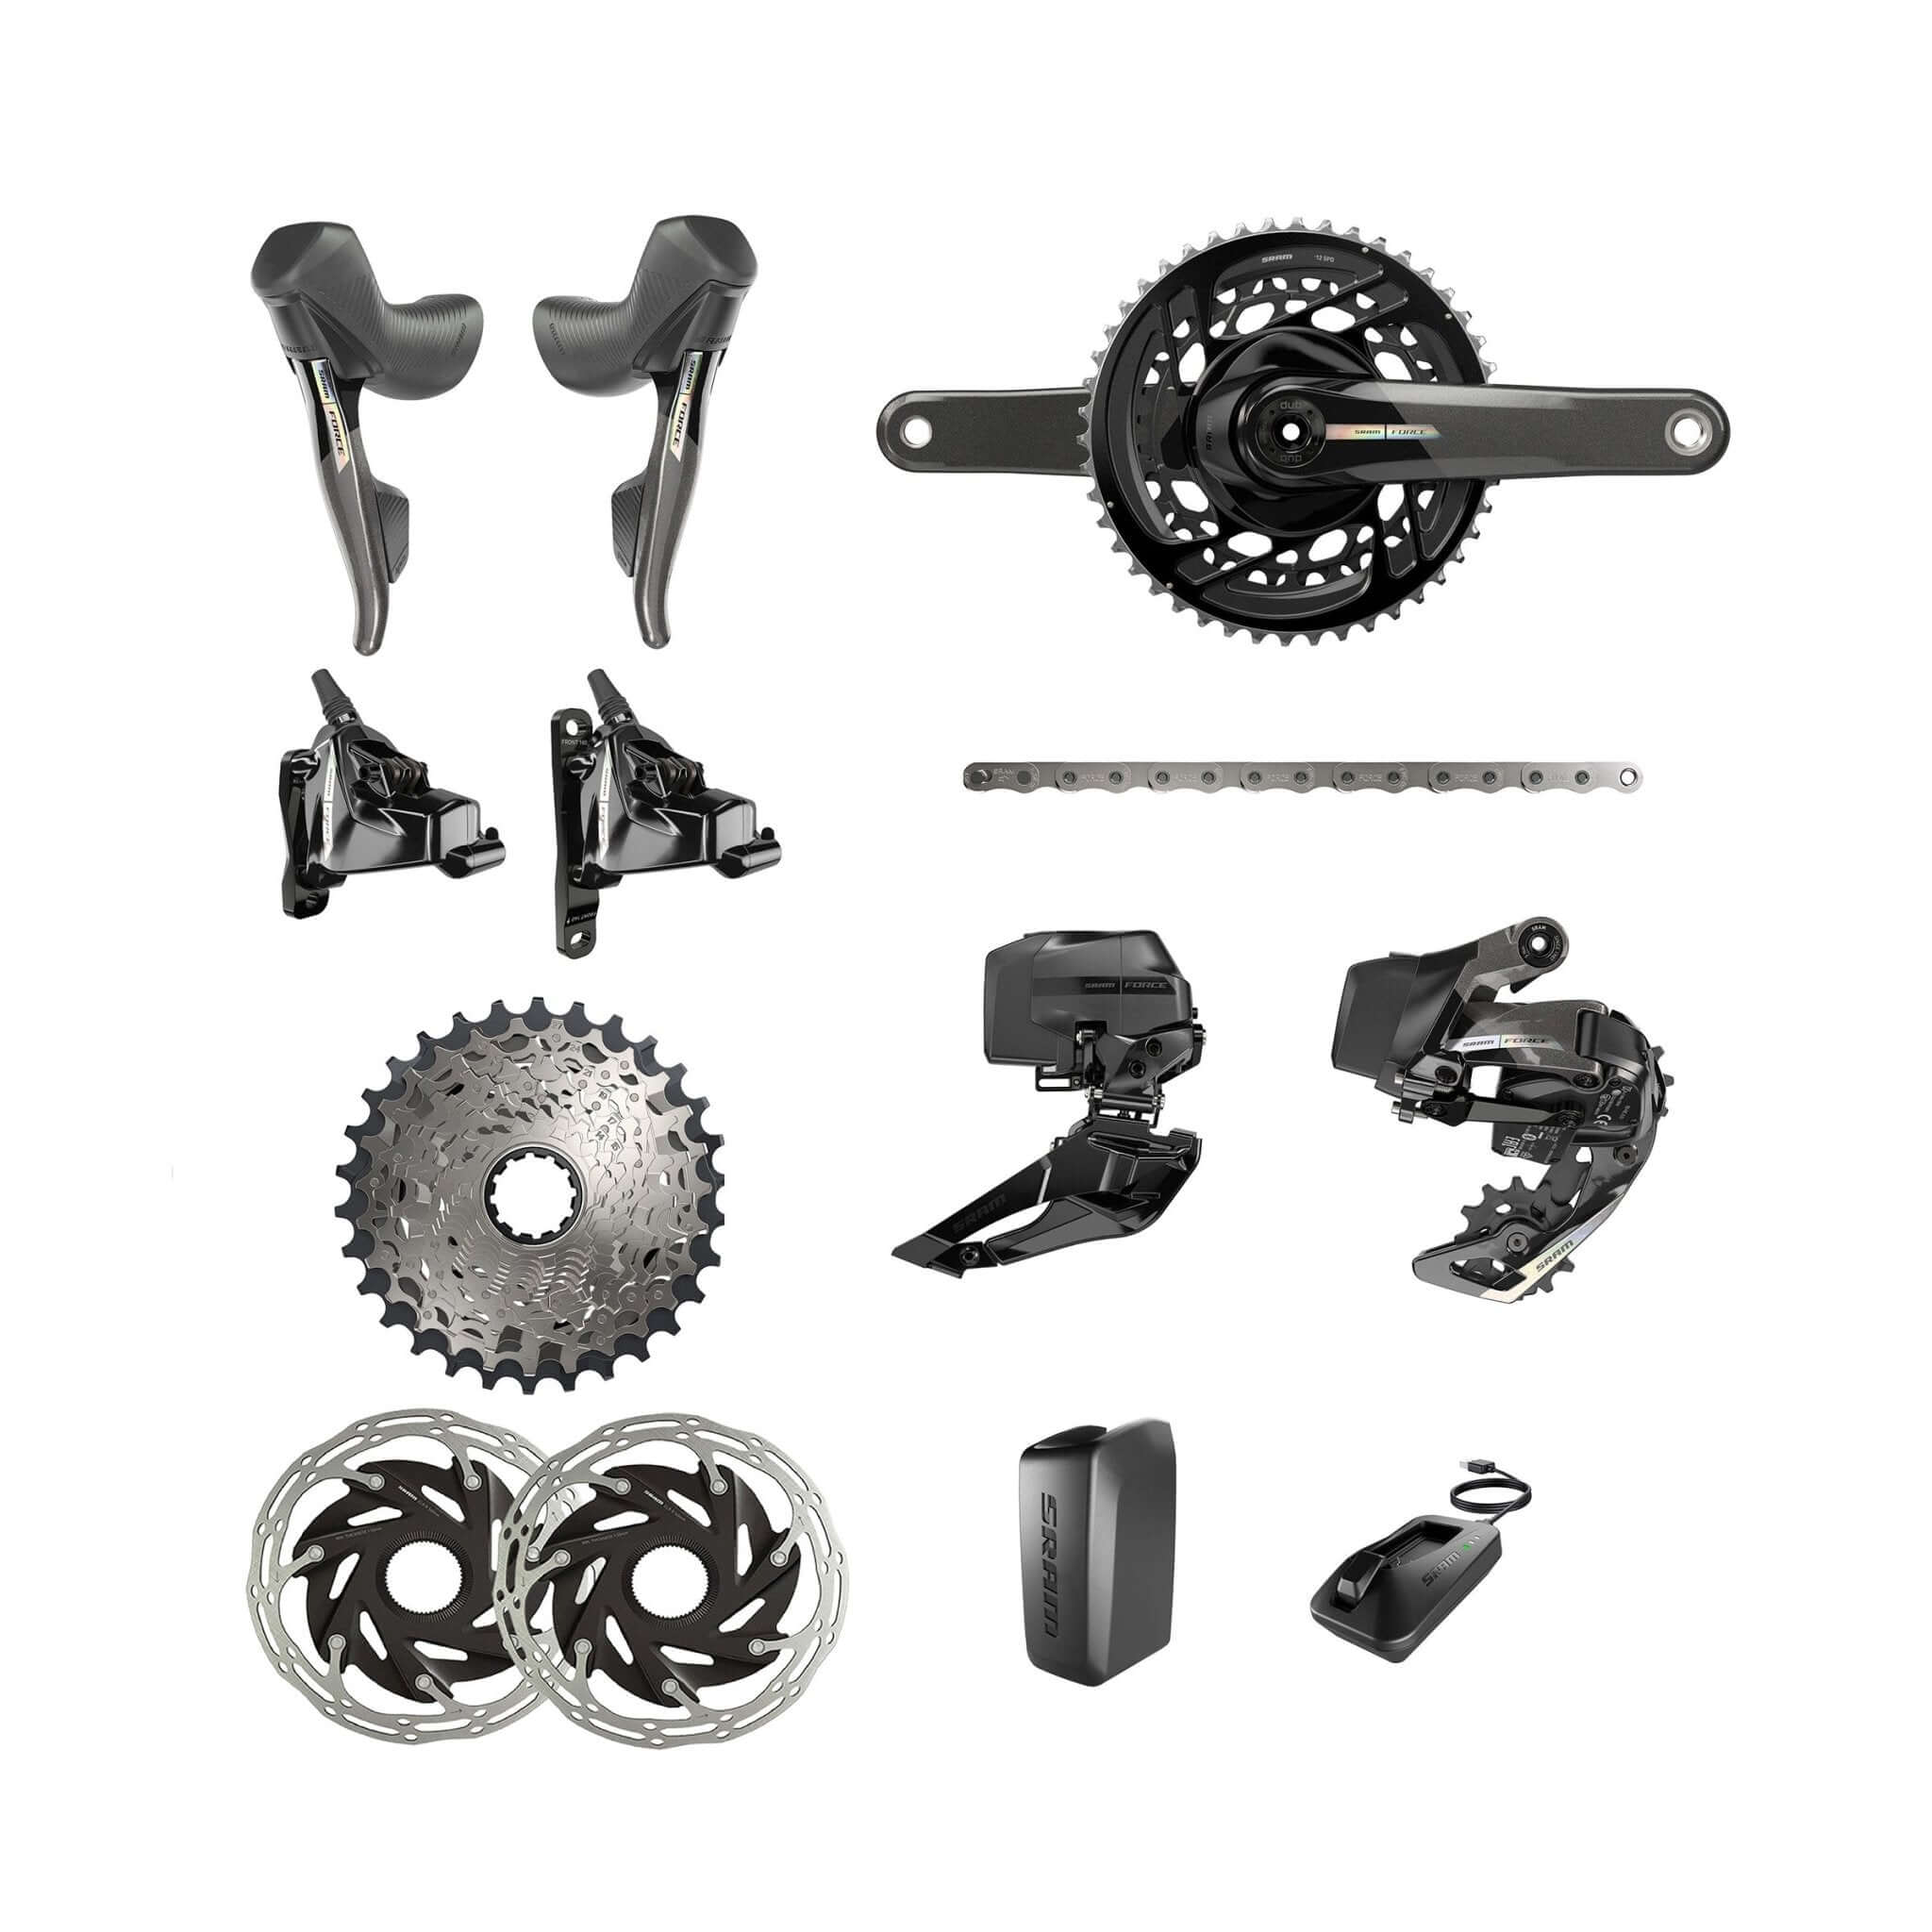 SRAM Force AXS D2 Power Meter Kit | Strictly Bicycles